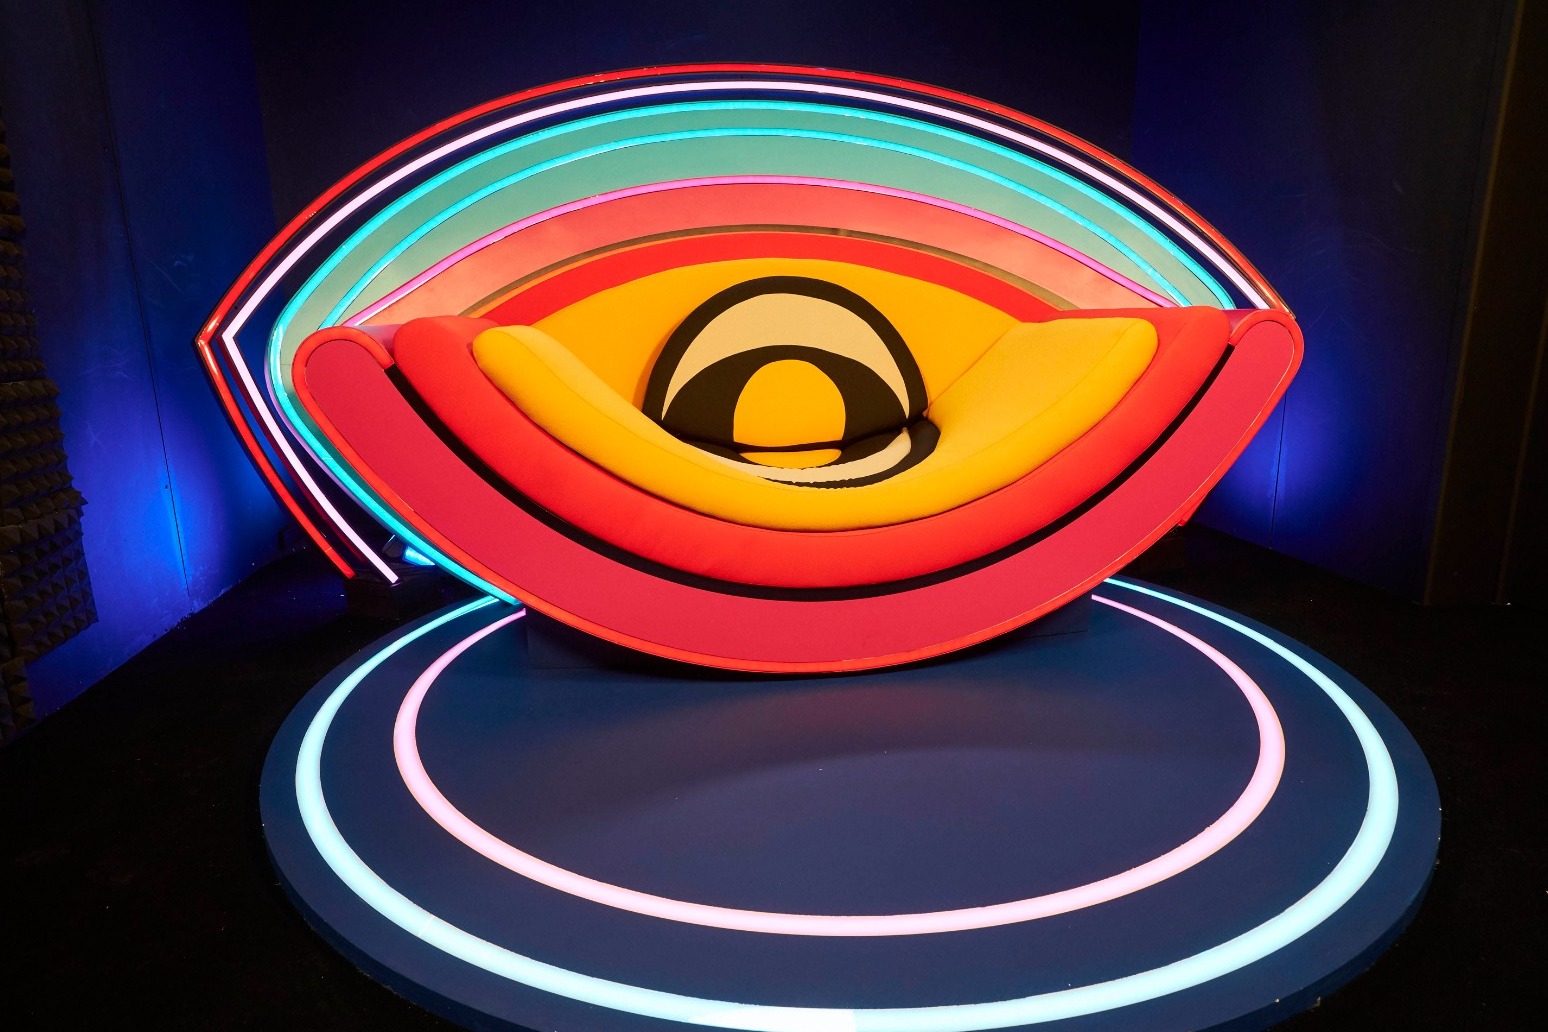 Big Brother to welcome new batch of housemates as show returns after five years 